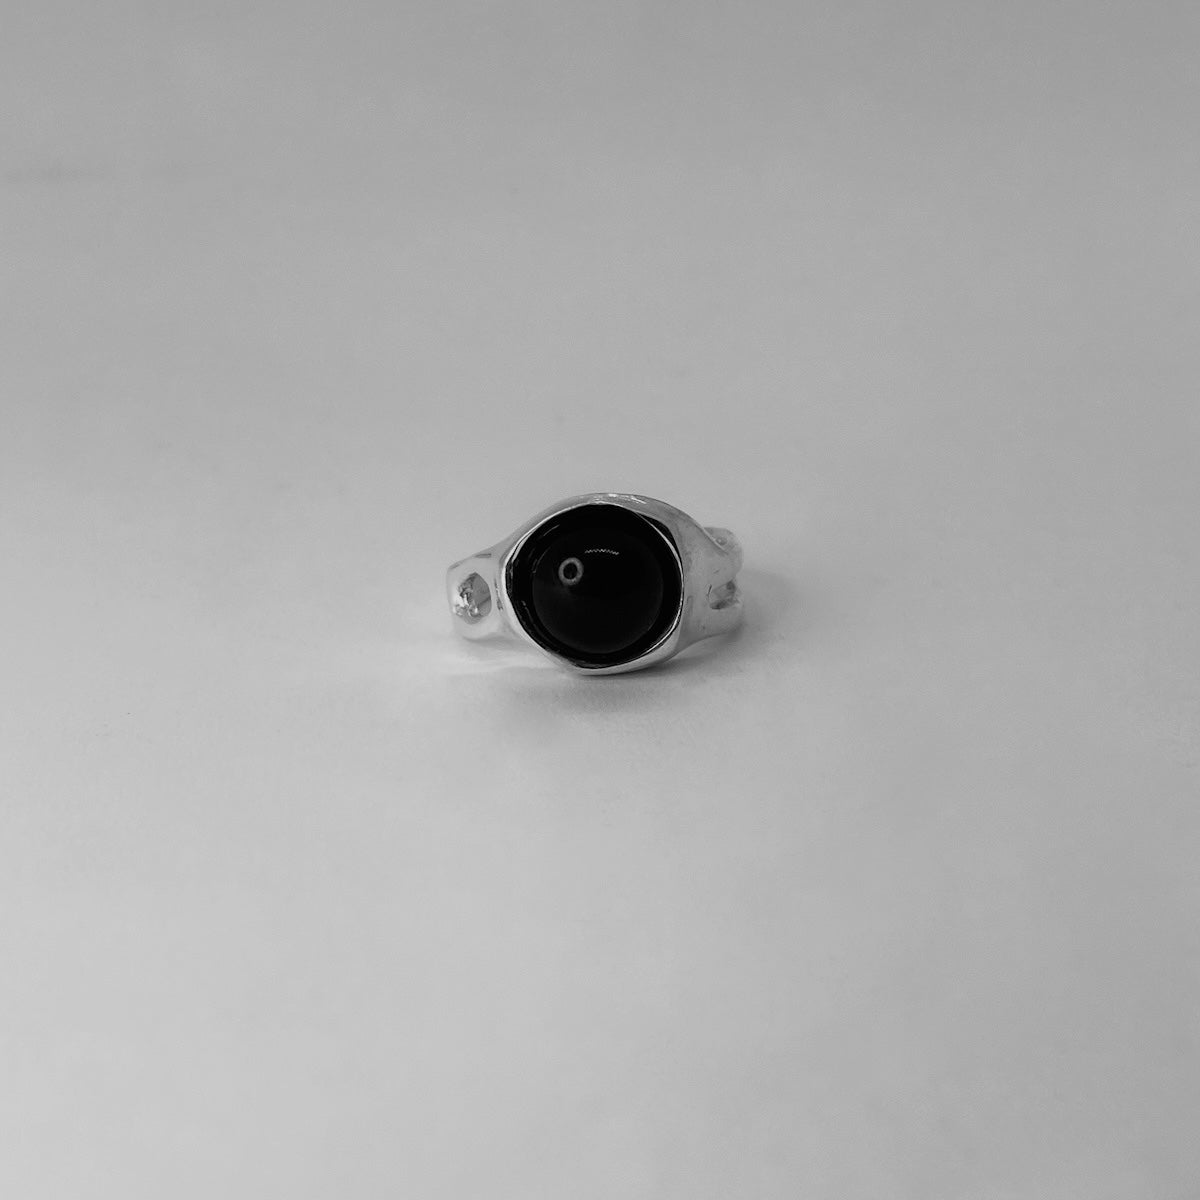 The Mineral ring is a handmade piece made of 925 sterling silver. It features a smooth and glossy surface, adorned with a semi-precious stone in three options: black agate, red carnelian, and brown tiger eye. Around the ring, there are openings, adding elements of elegance. The ring is open and adjustable, allowing for customization for up to three sizes. Therefore, it is important to know your ring size.